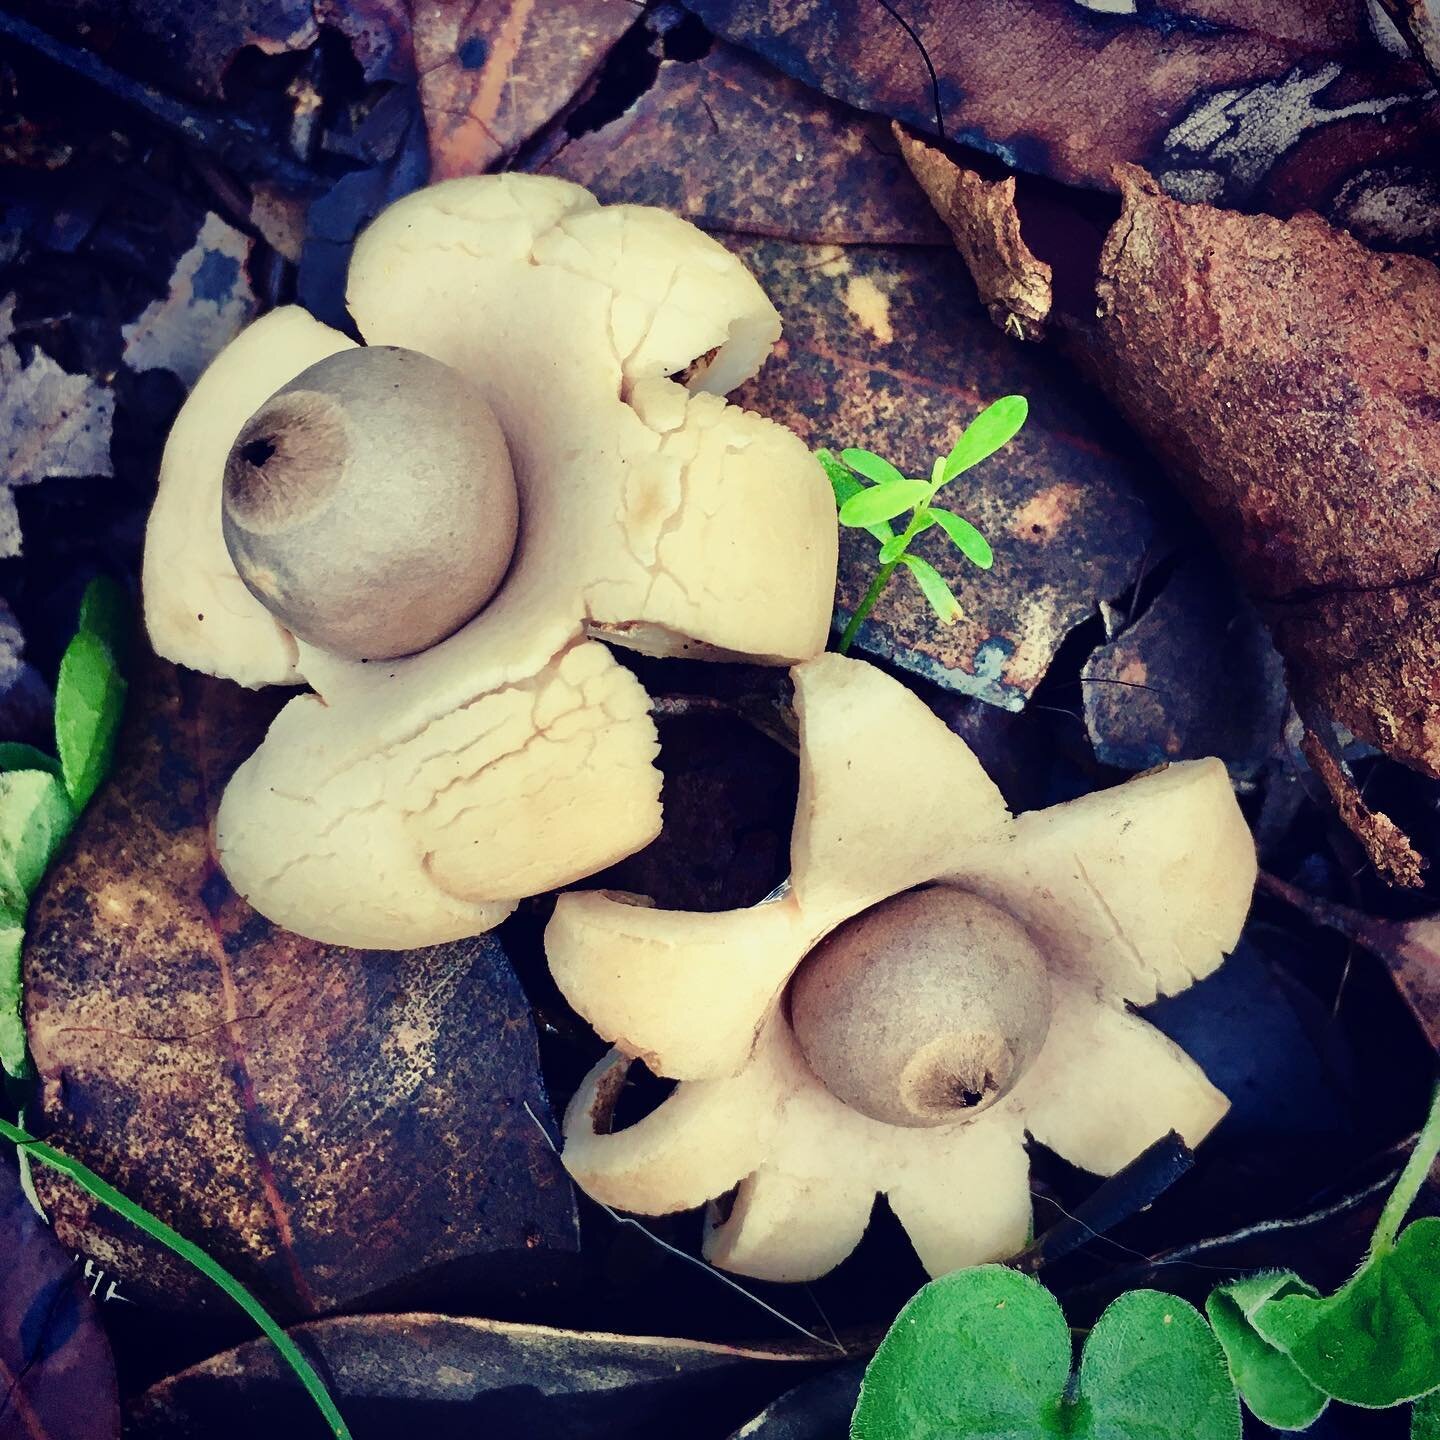 Earth star fungi . When you #shinrinyoku you notice the beauty in #nature and see exquisite but ordinary things . Amazing earthstar fungus - Geastrum javanicum species in #boranupforest on my Sunday #awewalk. #earthstar #fungilove #fungi #southwestwi